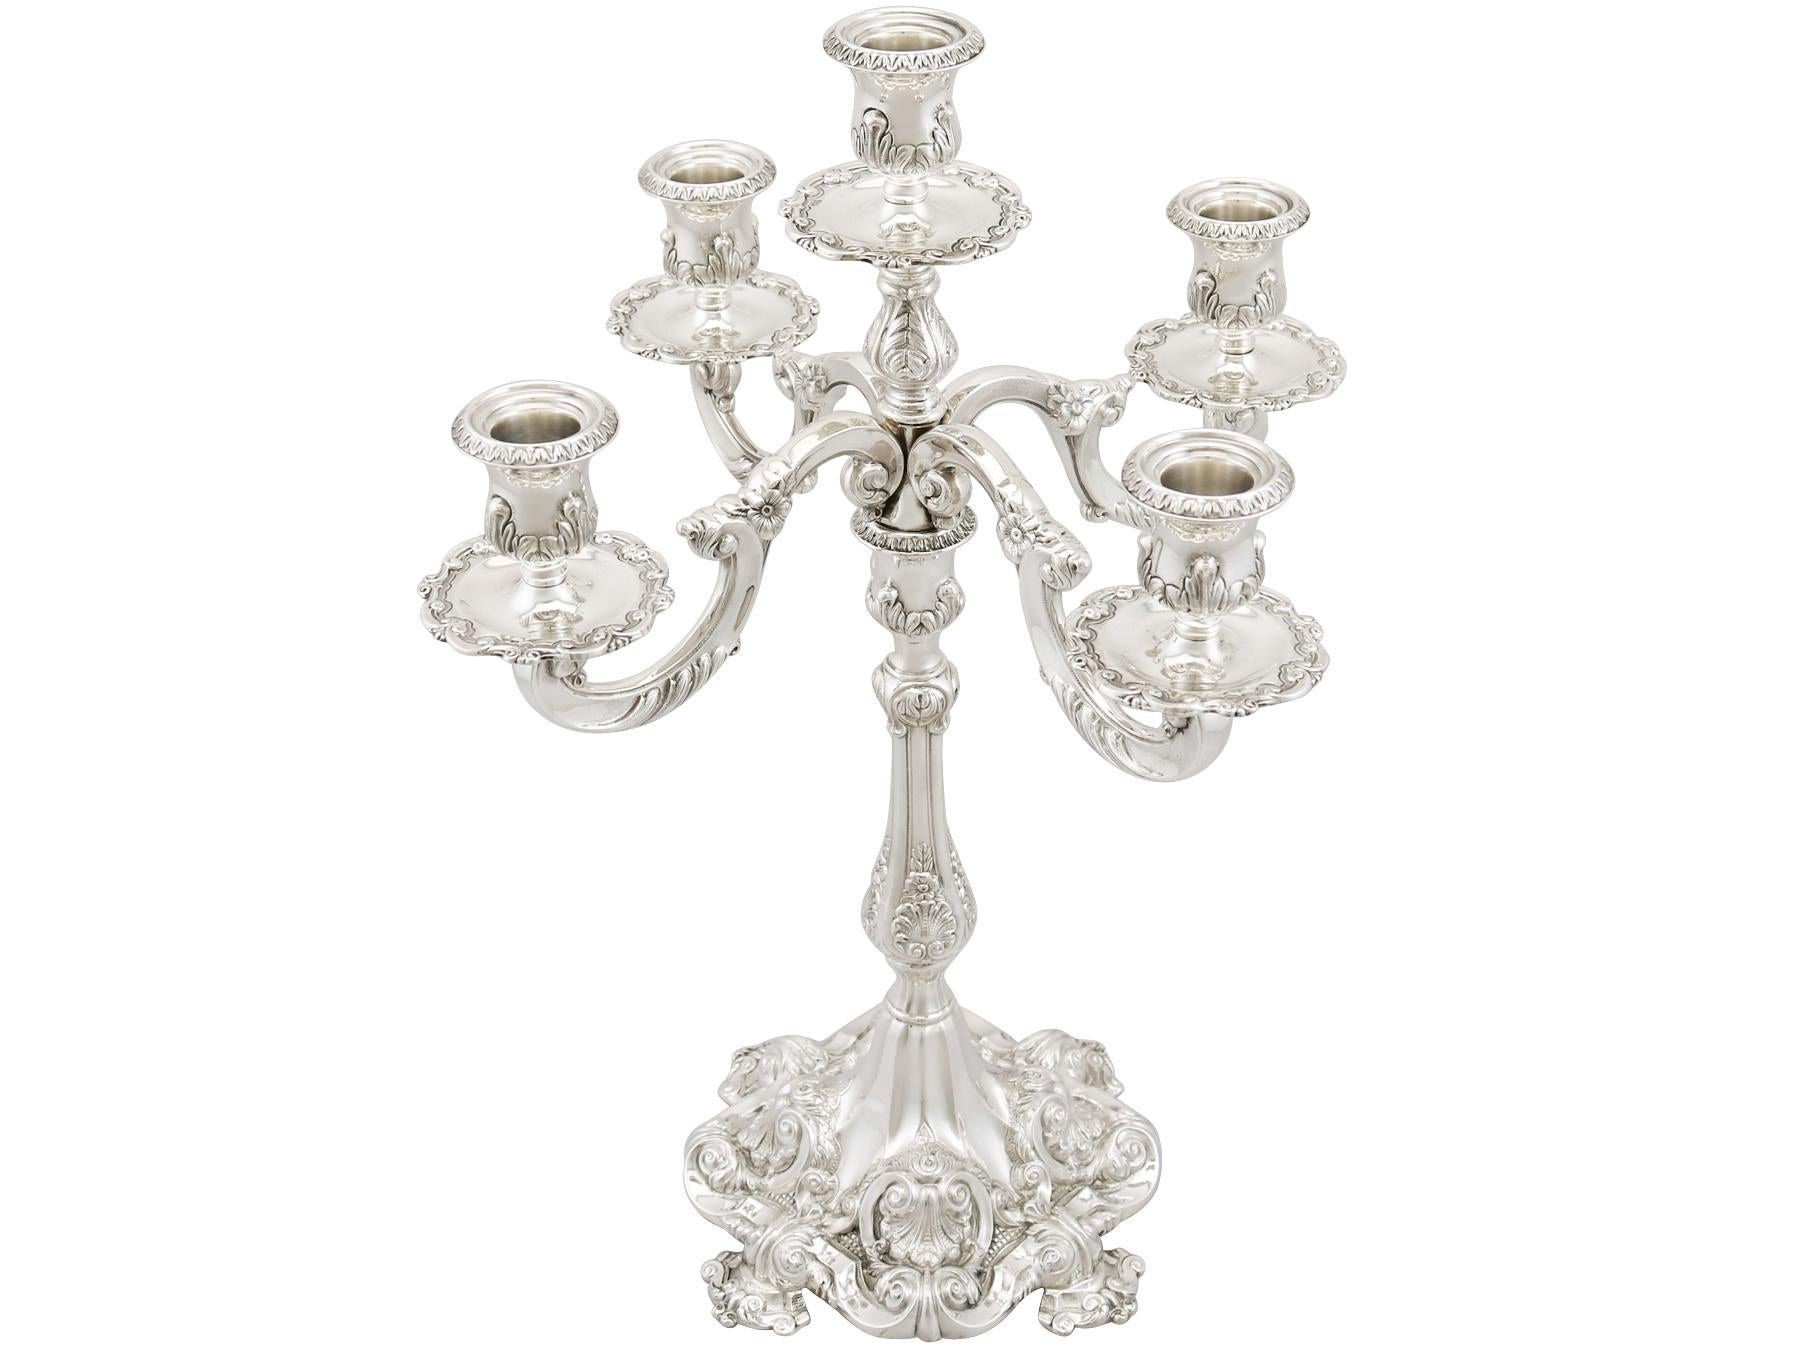 Late 20th Century 1990s Vintage Portuguese Sterling Silver Five-Light Candelabrum